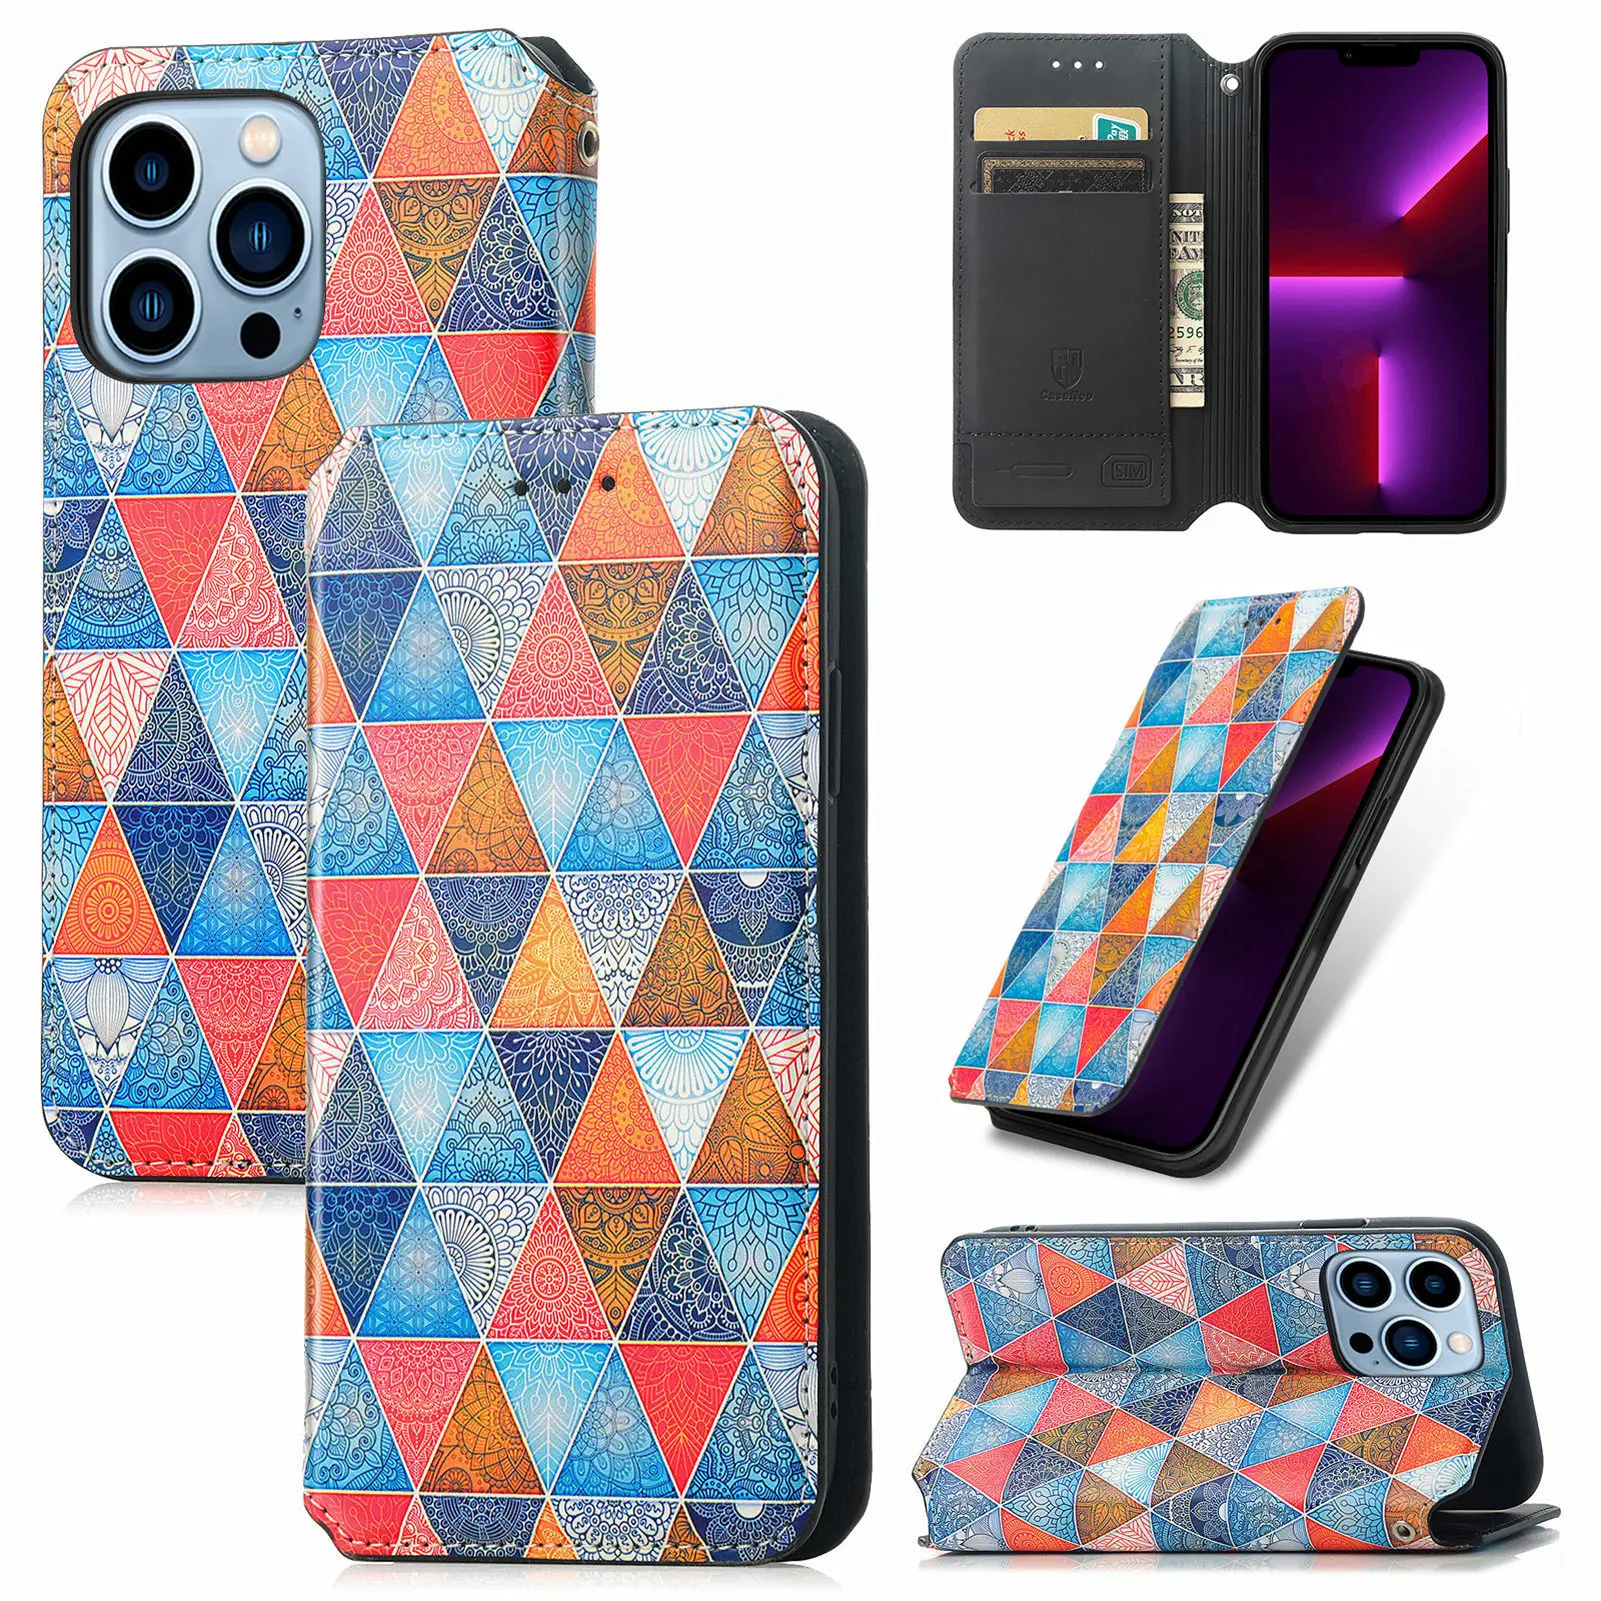 Magnetic Colorful Leather Case For Samsung Galaxy S22 S21 S20 Ultra PLUS Fe NOTE 20 10 lite Ultra PRO 9 Graffit iphone case enlarge